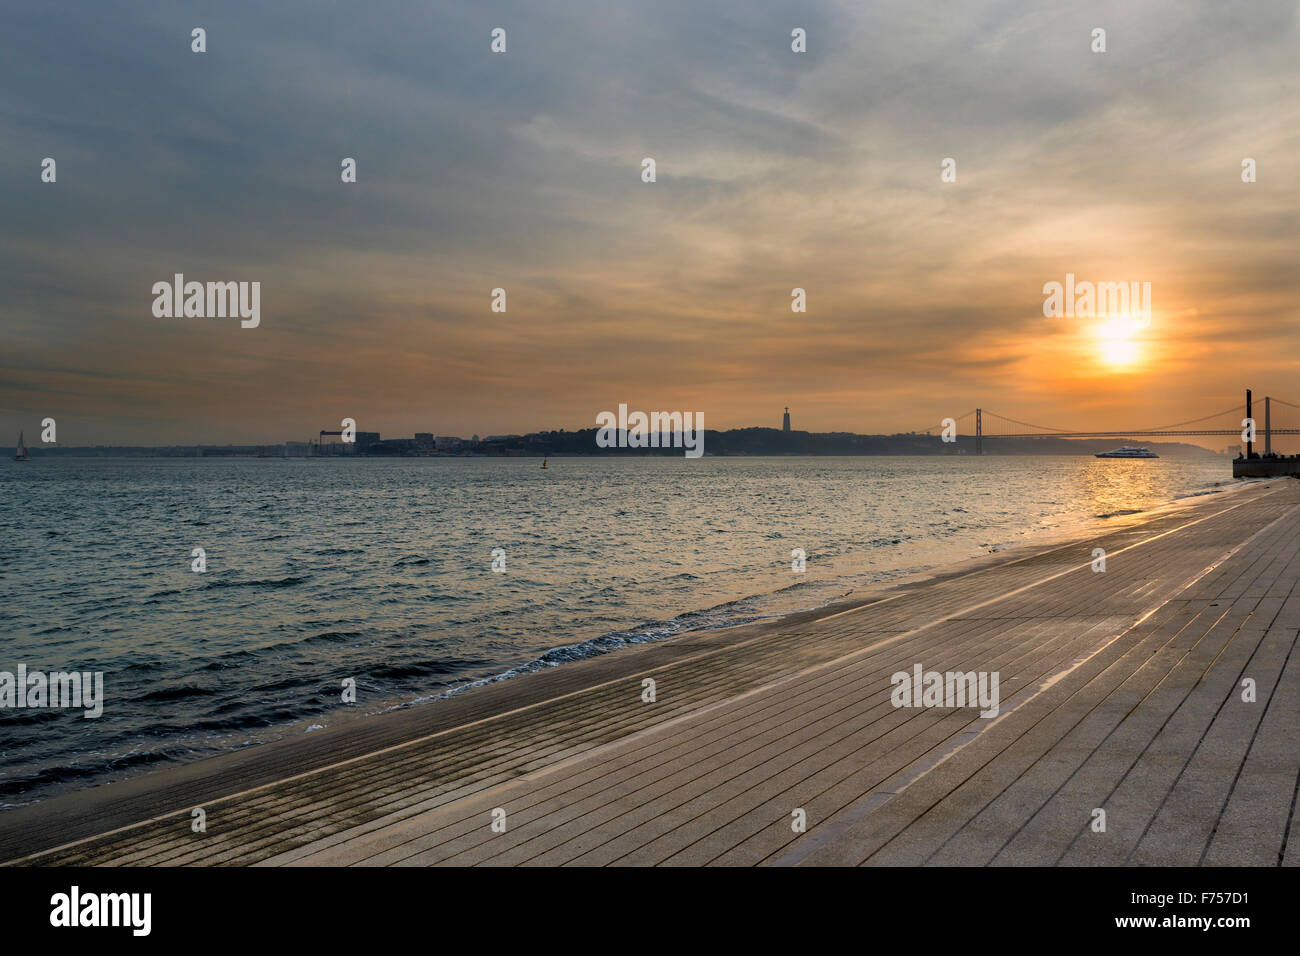 View of the River Tagus in Lisbon, Portugal, at sunset Stock Photo